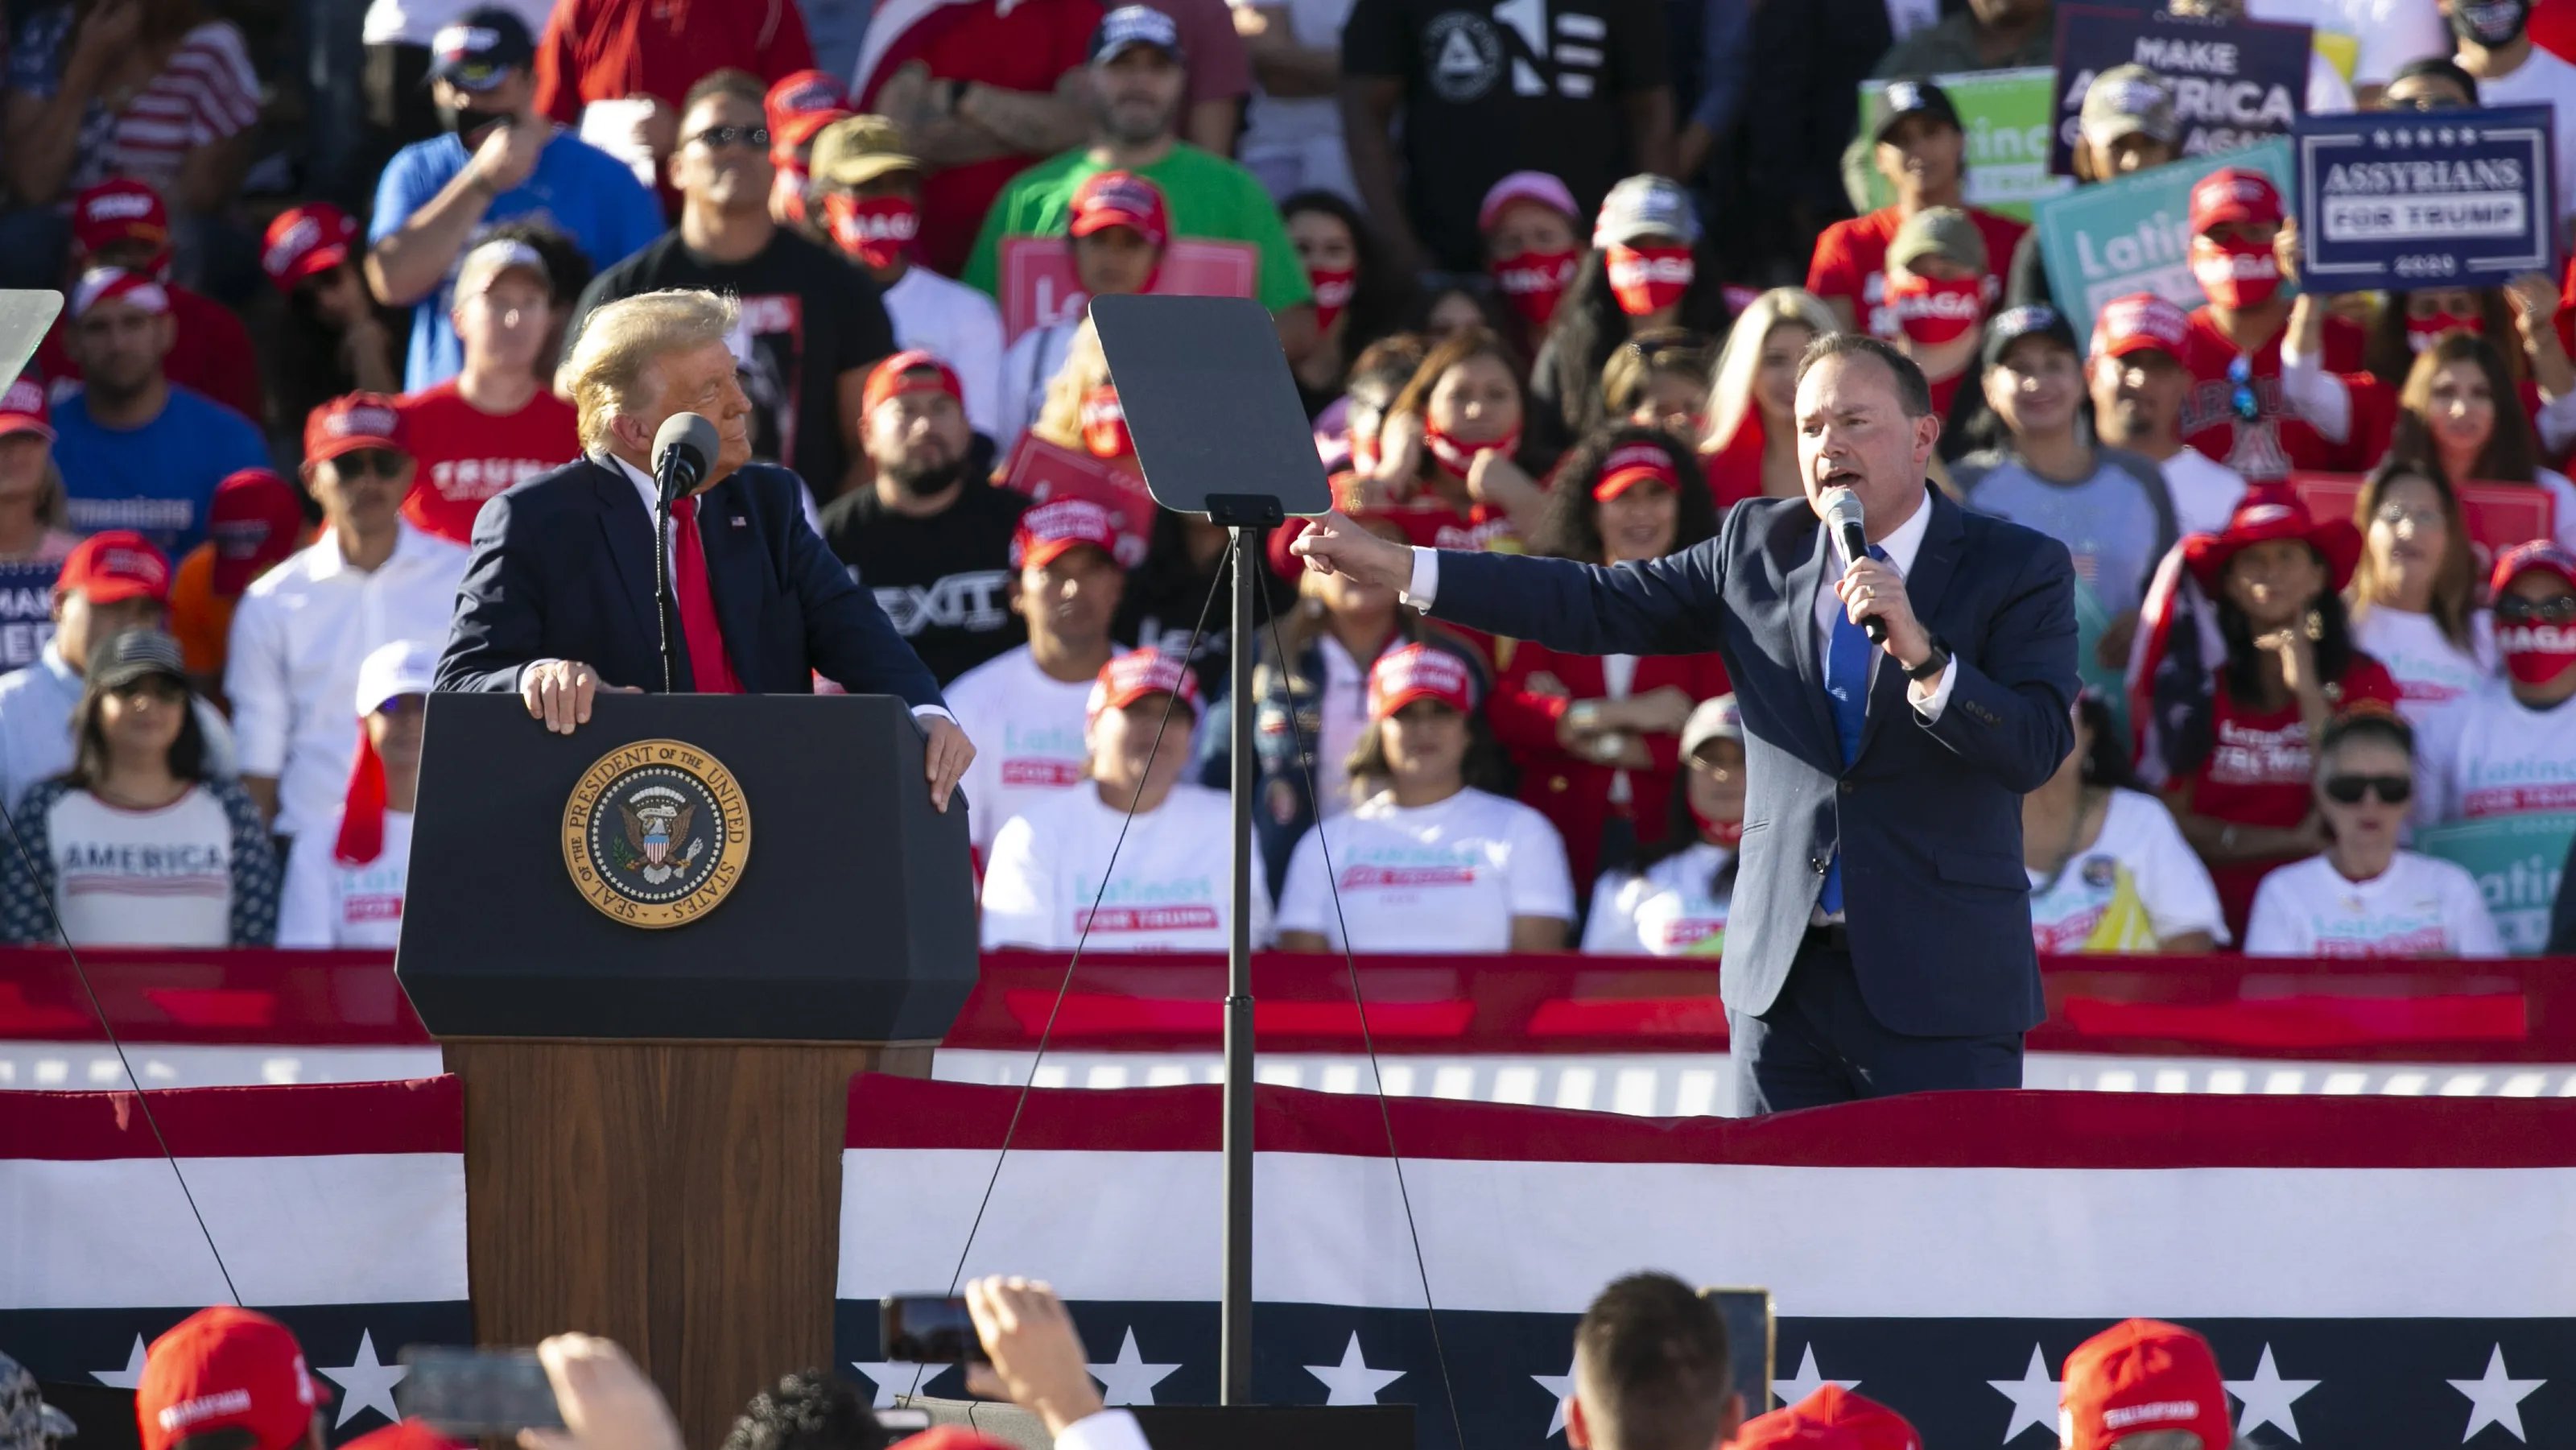 A 2020 republican GOP rally, Donald Trump at podium on left, while Mile Lee makes a speech in which he compares Trump to Captain Moroni from the book of Mormon.